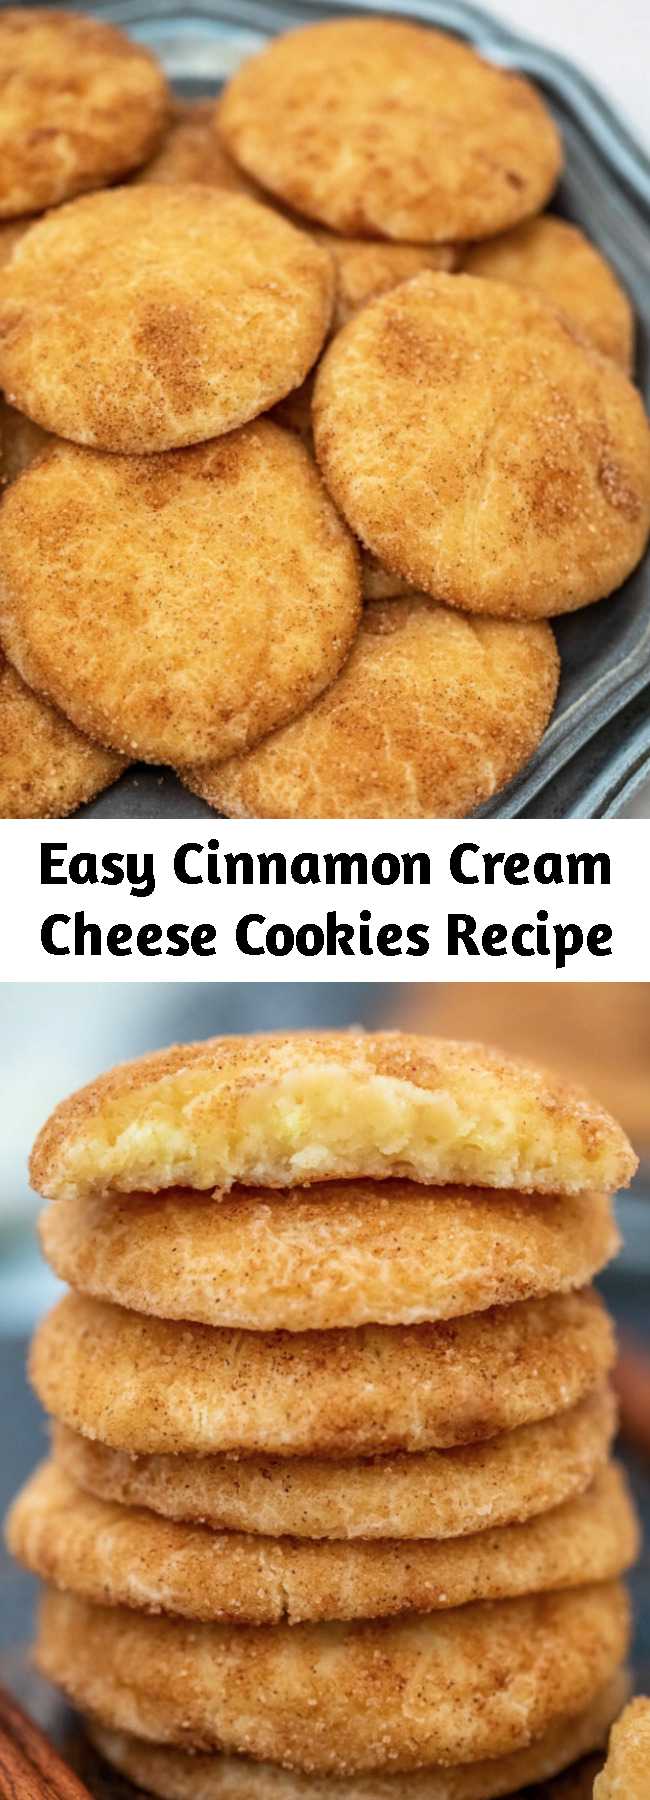 Easy Cinnamon Cream Cheese Cookies Recipe - Cinnamon Cream Cheese Cookies are soft, chewy, and irresistible! Celebrate the holidays with these snickerdoodles that will surely be a crowd-pleaser! #cookies #creamcheesecookies #christmascookies #christmasrecipes